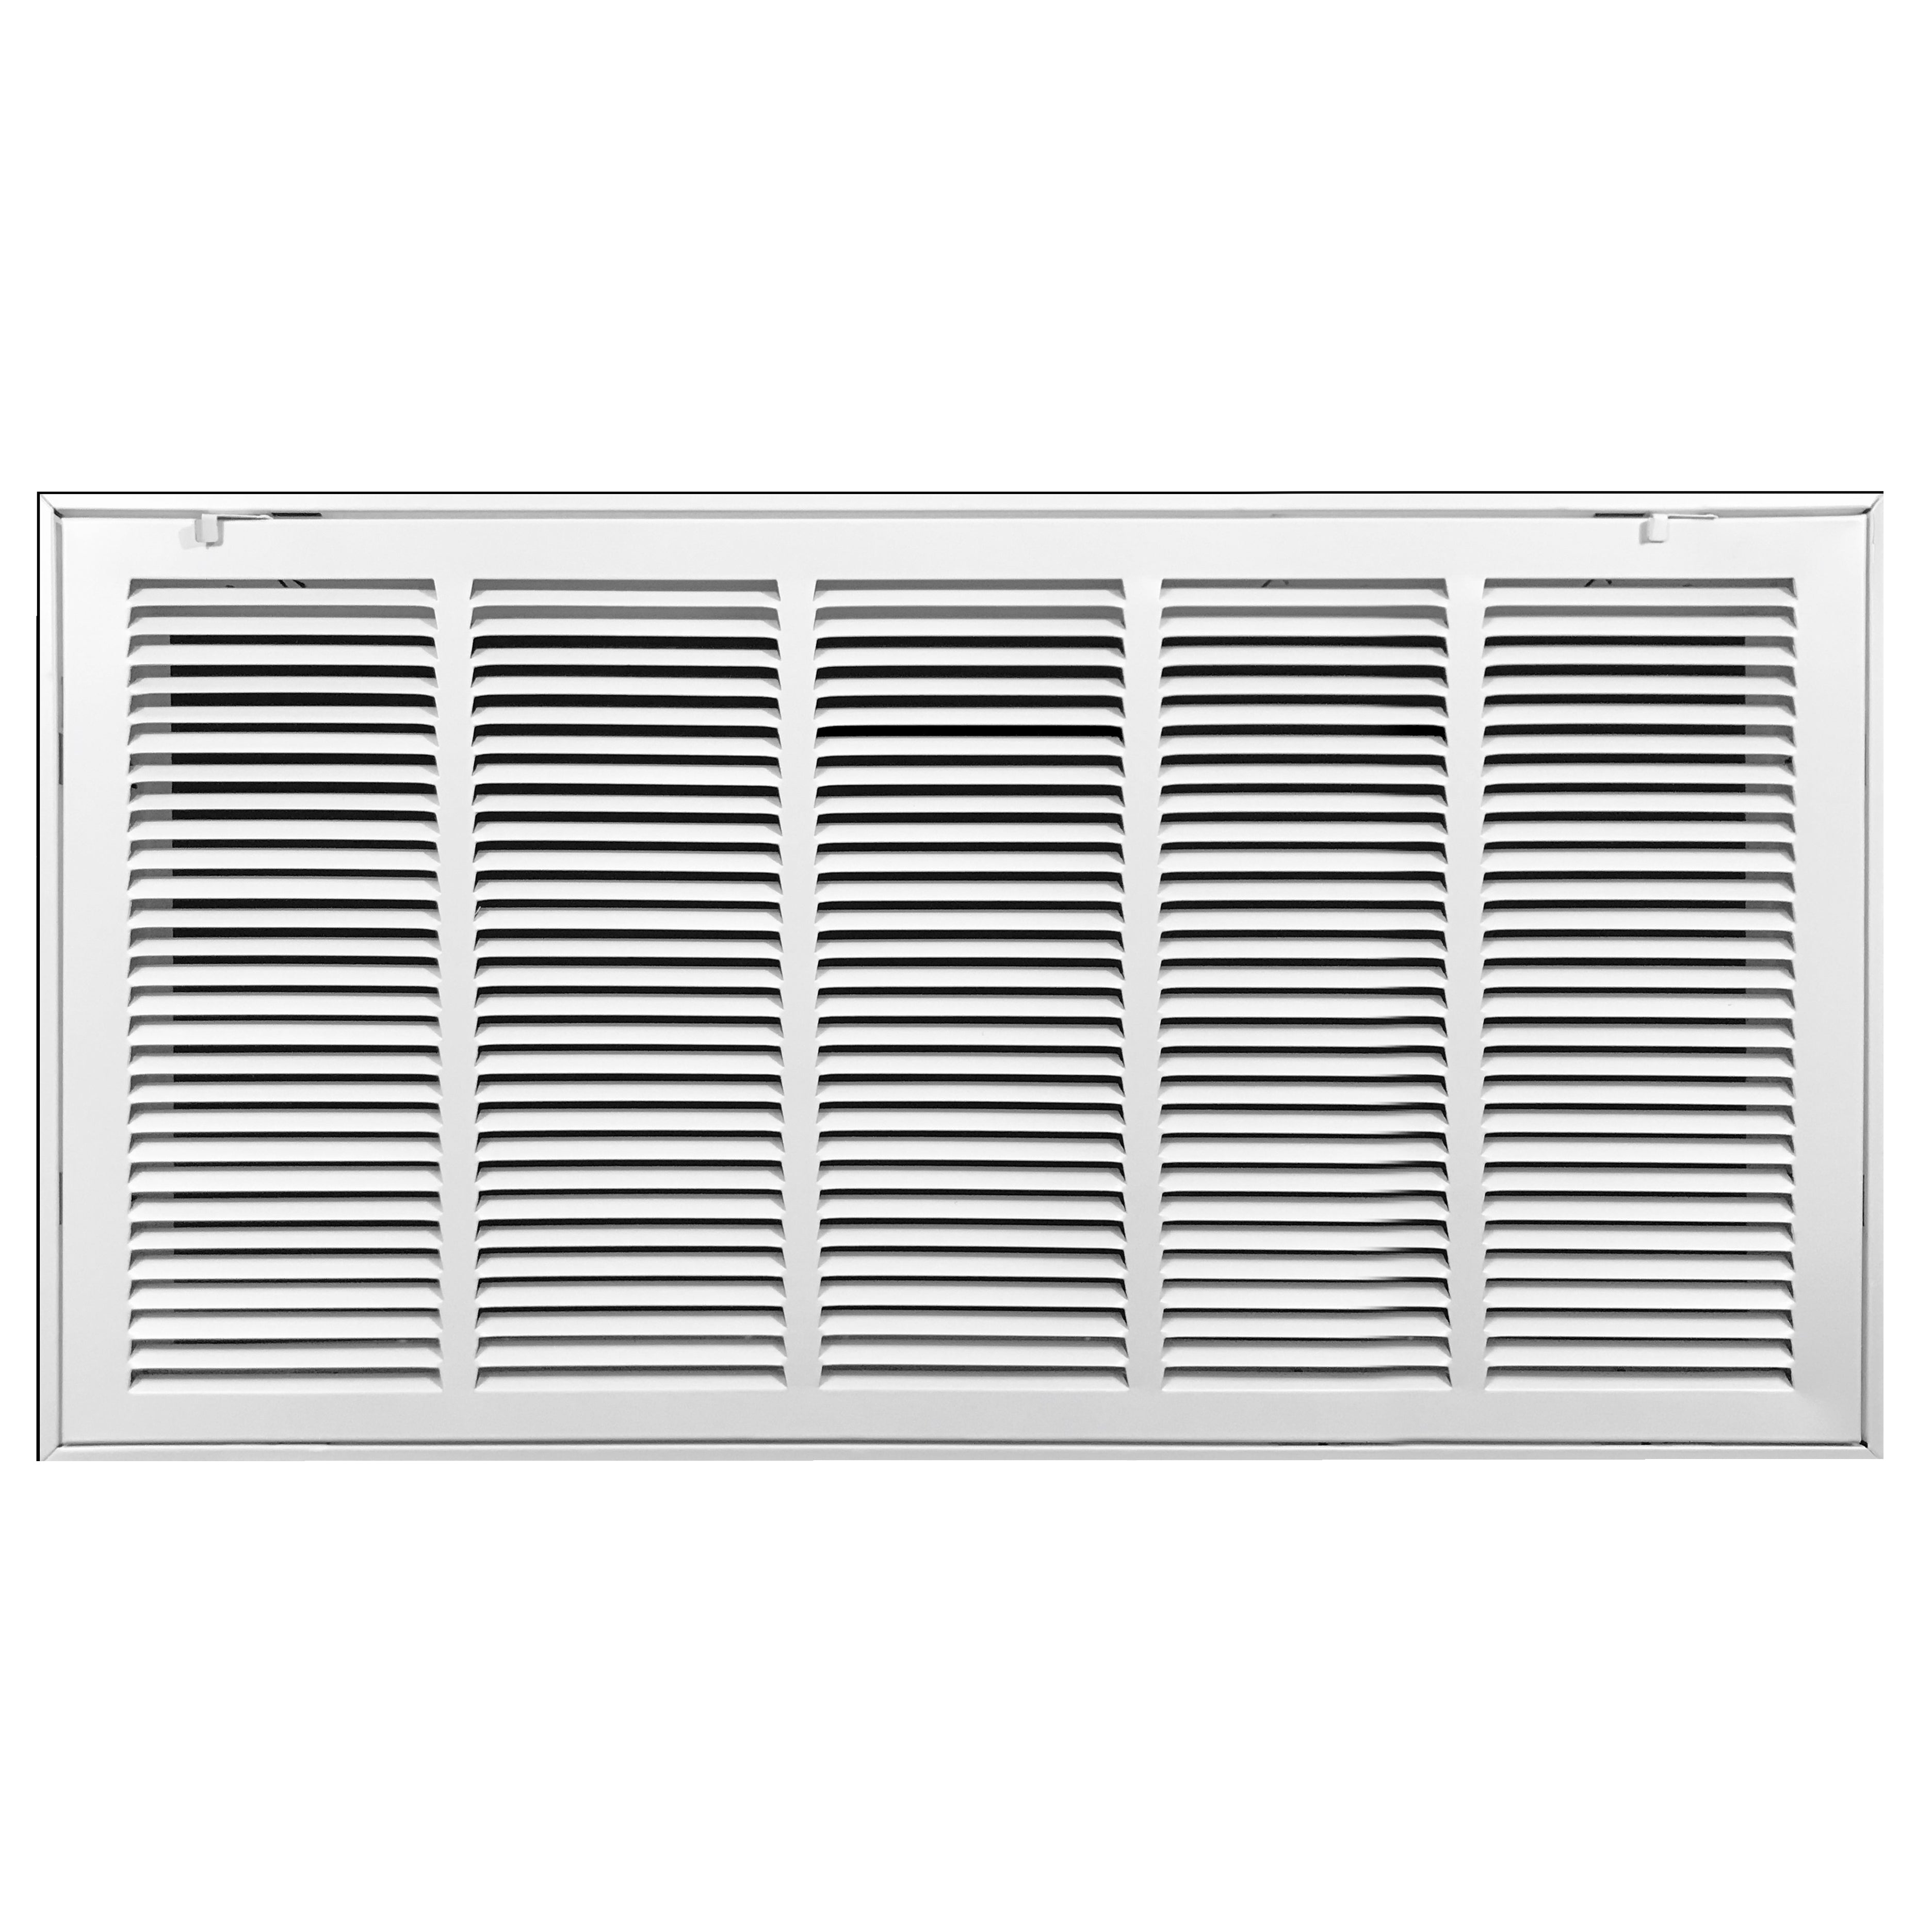 airgrilles 25" x 20" duct opening   hd steel return air filter grille for sidewall and ceiling 7hnd-rfg1-wh-25x20 038775638388 - 1